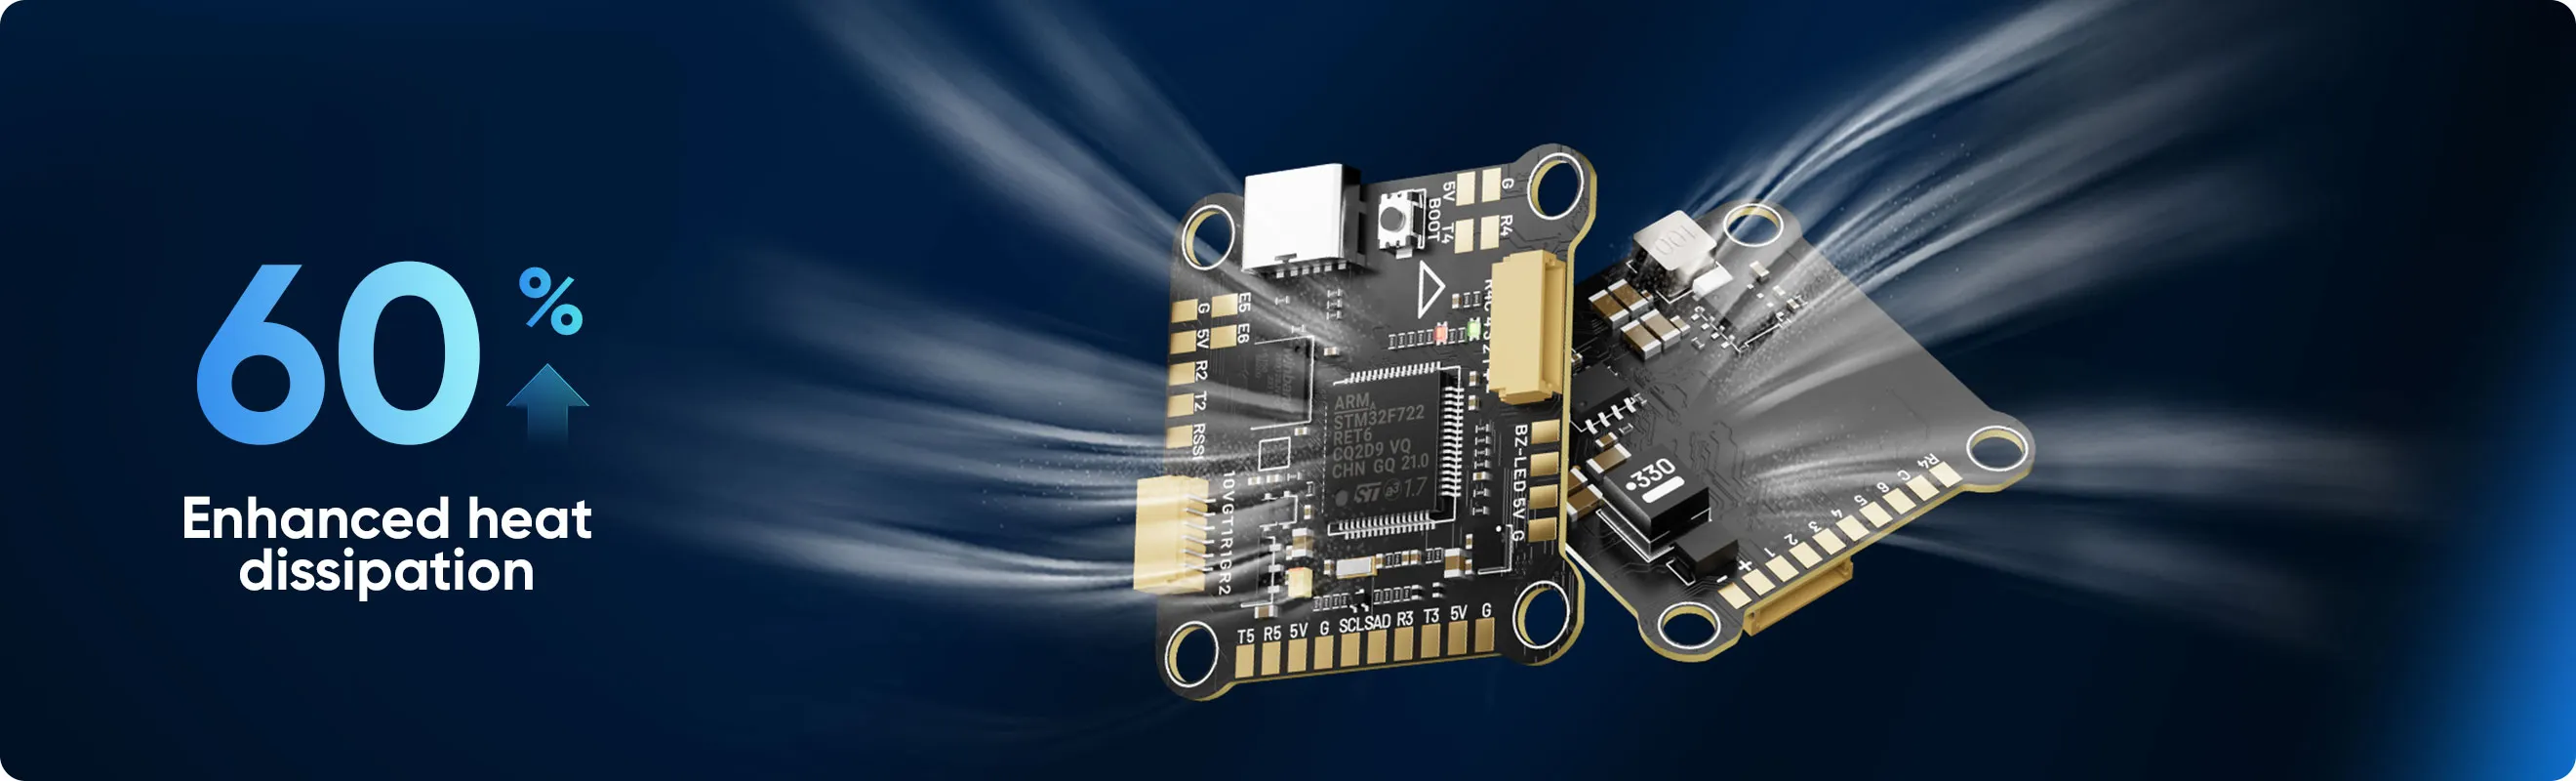 MEPS F7 HD flight controller with enhanced heat dissipation